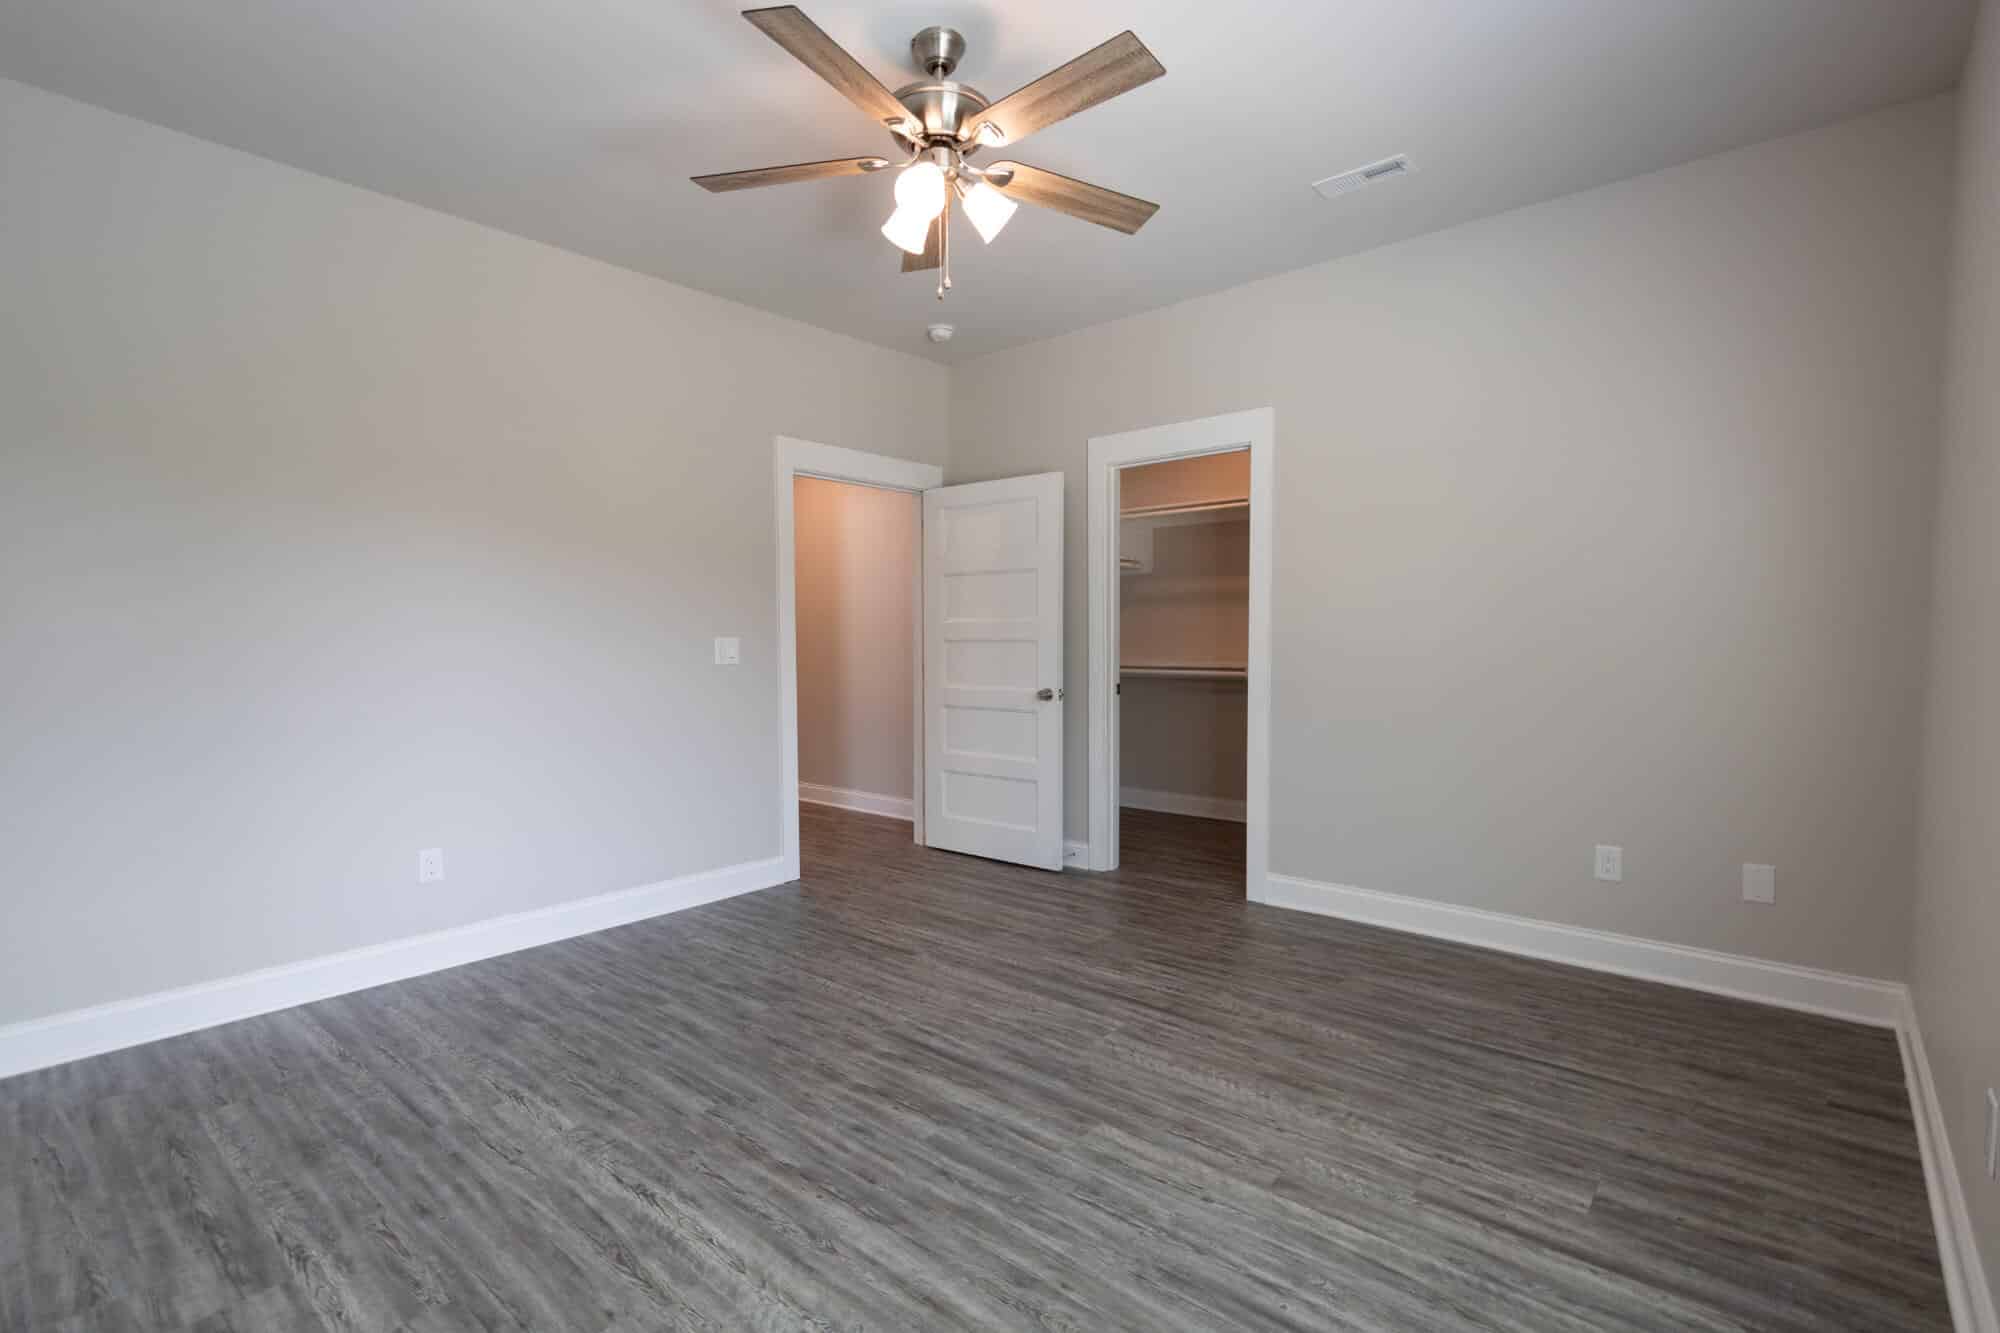 raleigh off campus apartments burt dr off campus apartments near nc state university bedroom walk in closet plank wood flooring